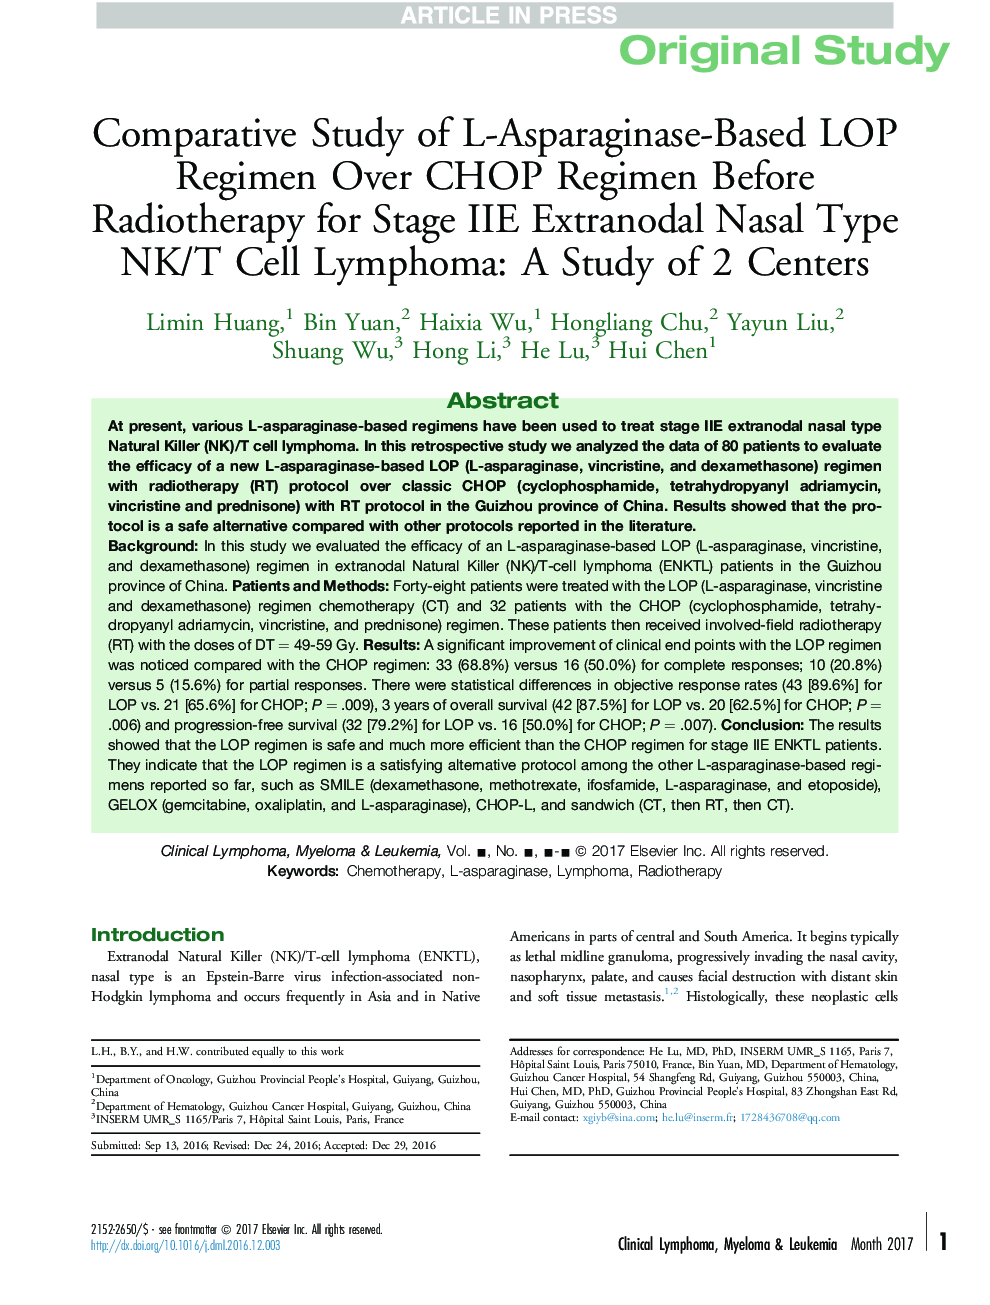 Comparative Study of L-Asparaginase-Based LOP Regimen Over CHOP Regimen Before Radiotherapy for Stage IIE Extranodal Nasal Type NK/T Cell Lymphoma: A Study of 2 Centers